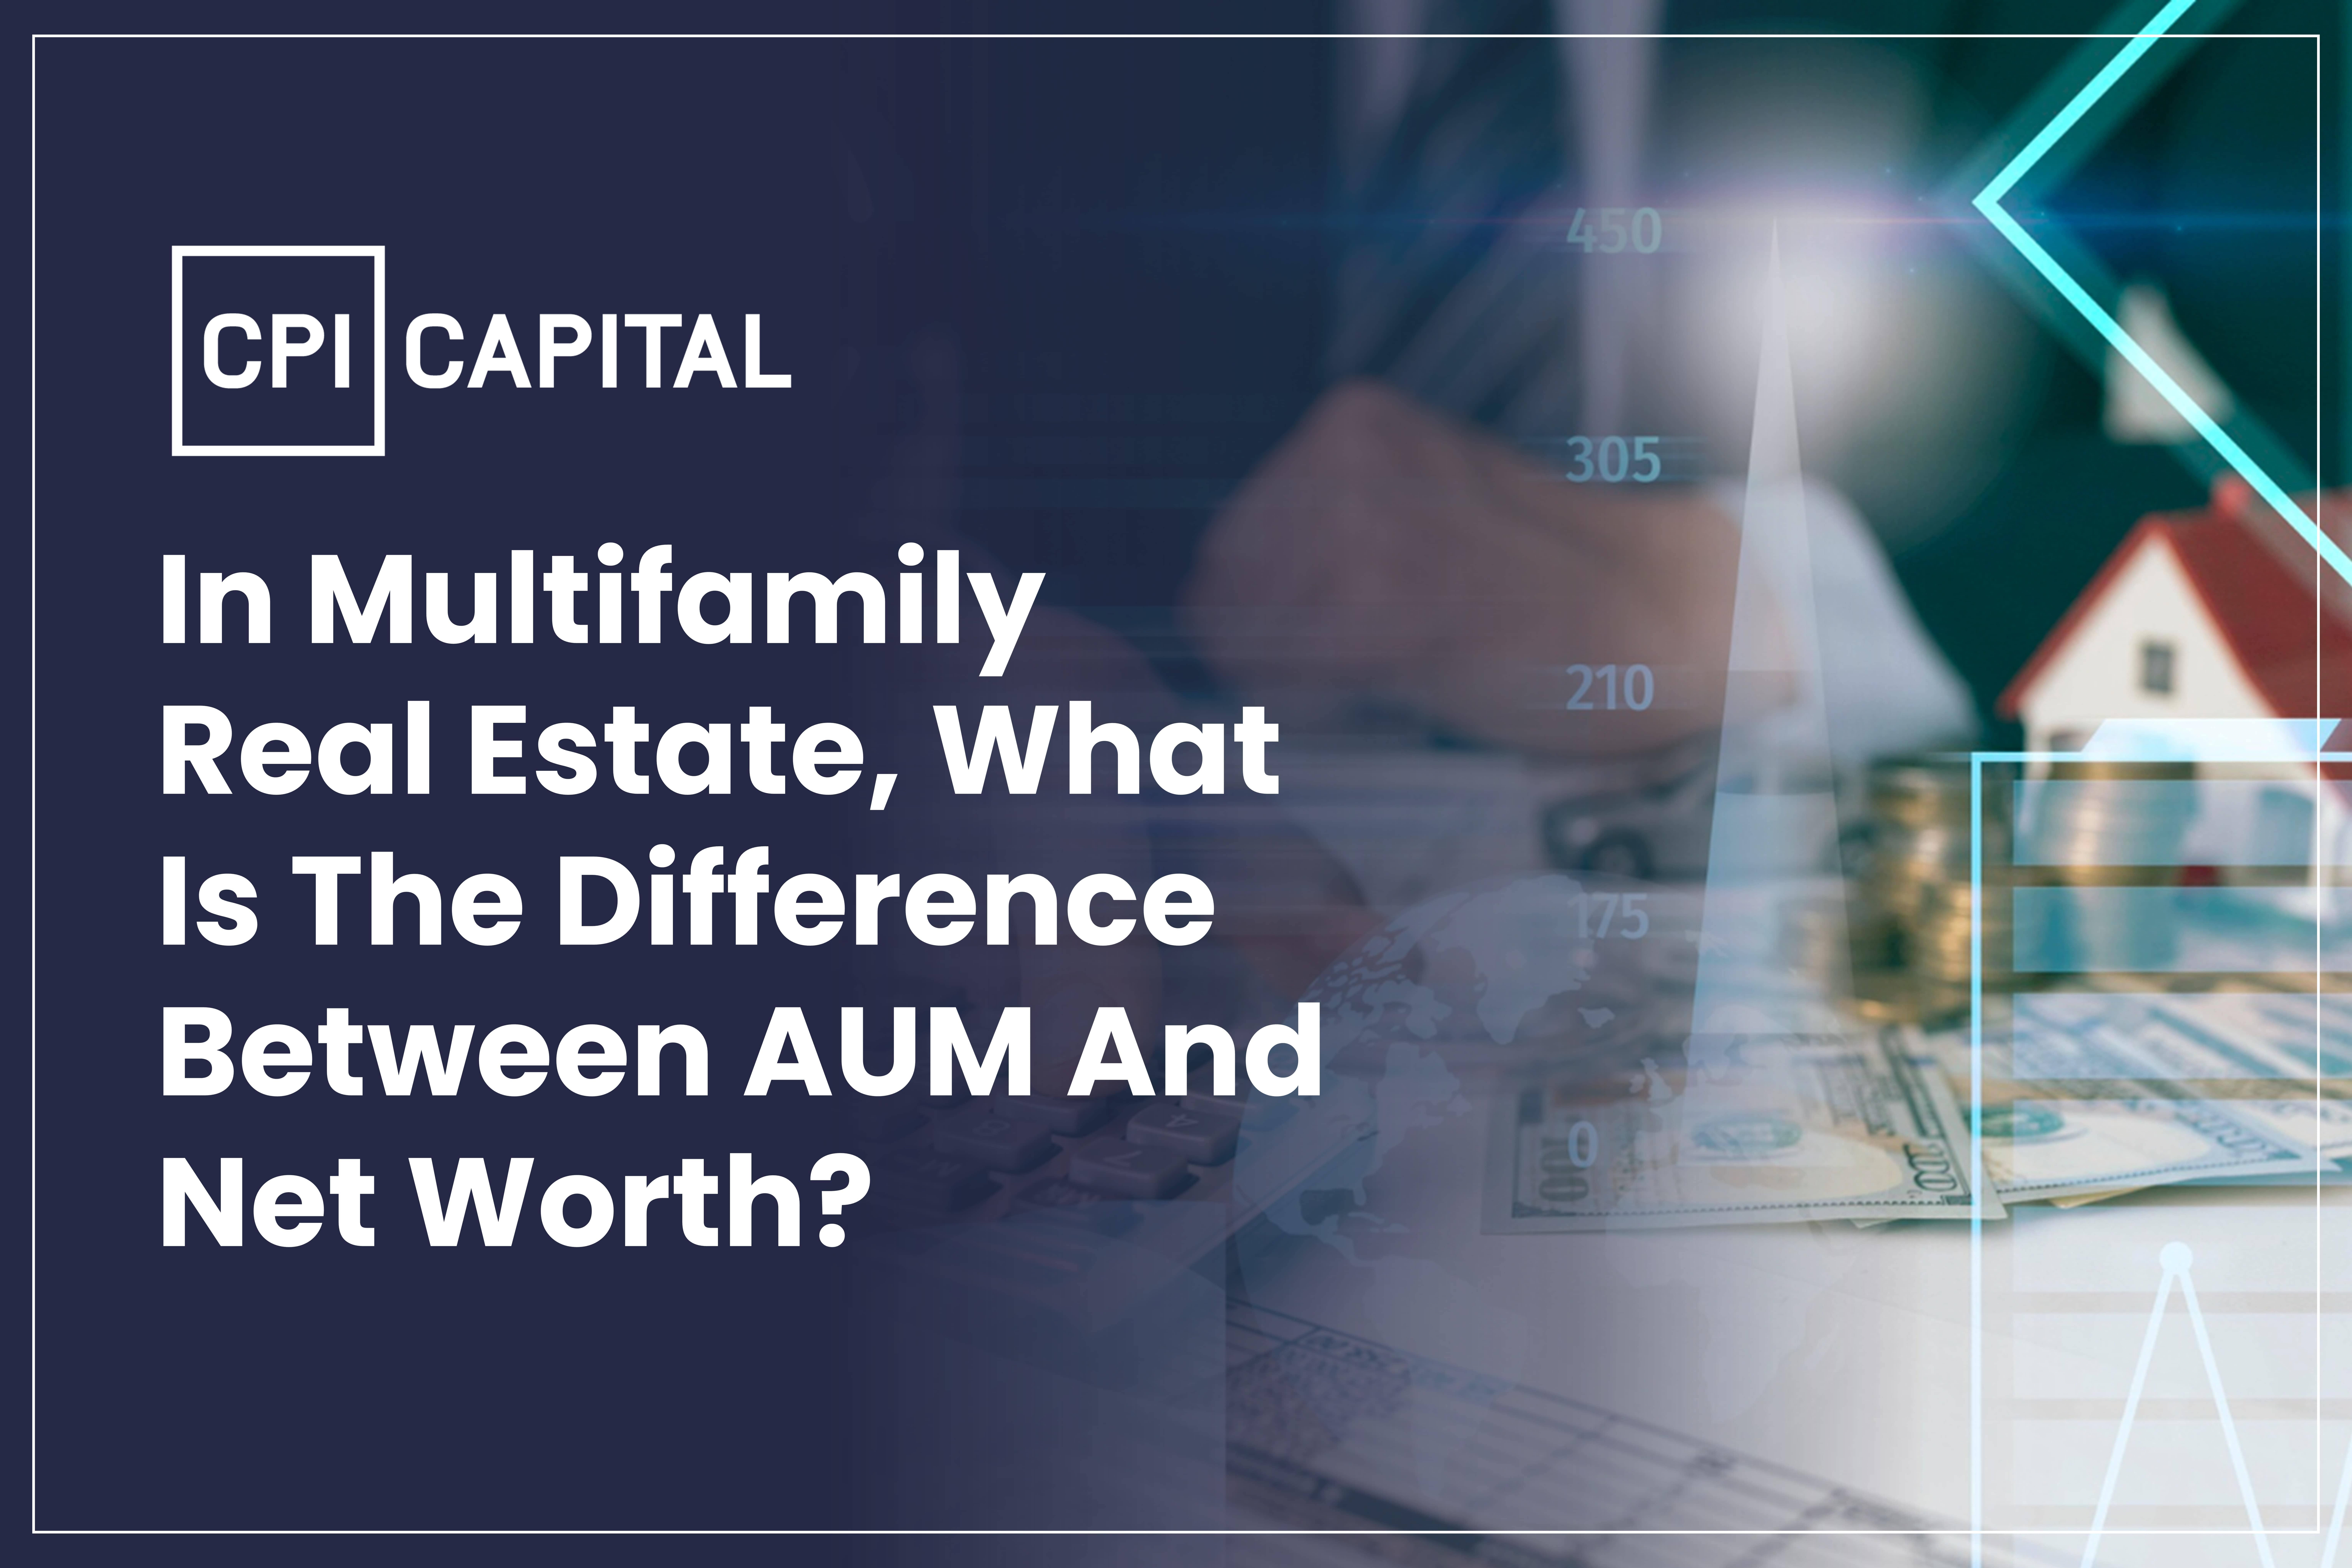 In Multifamily Real Estate, What Is The Difference Between AUM And Net Worth?